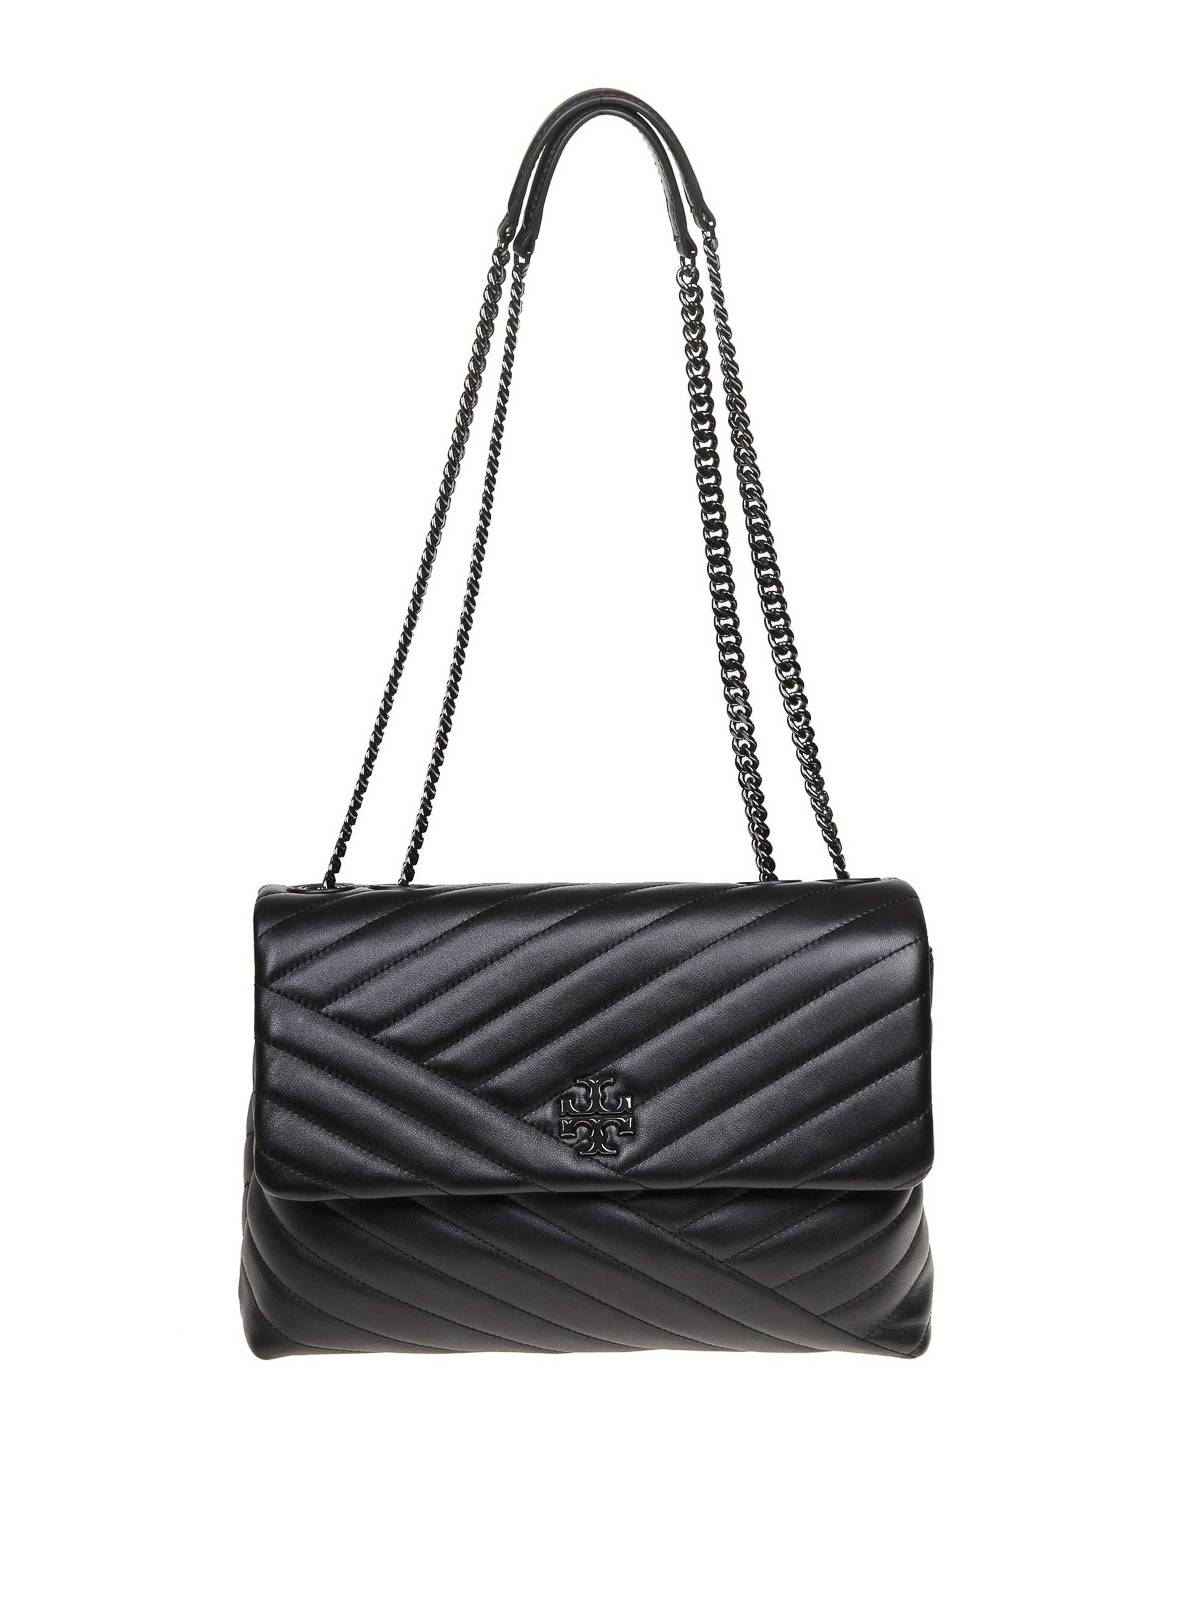 Shoulder bags Tory Burch - Kira quilted leather bag - 58465013